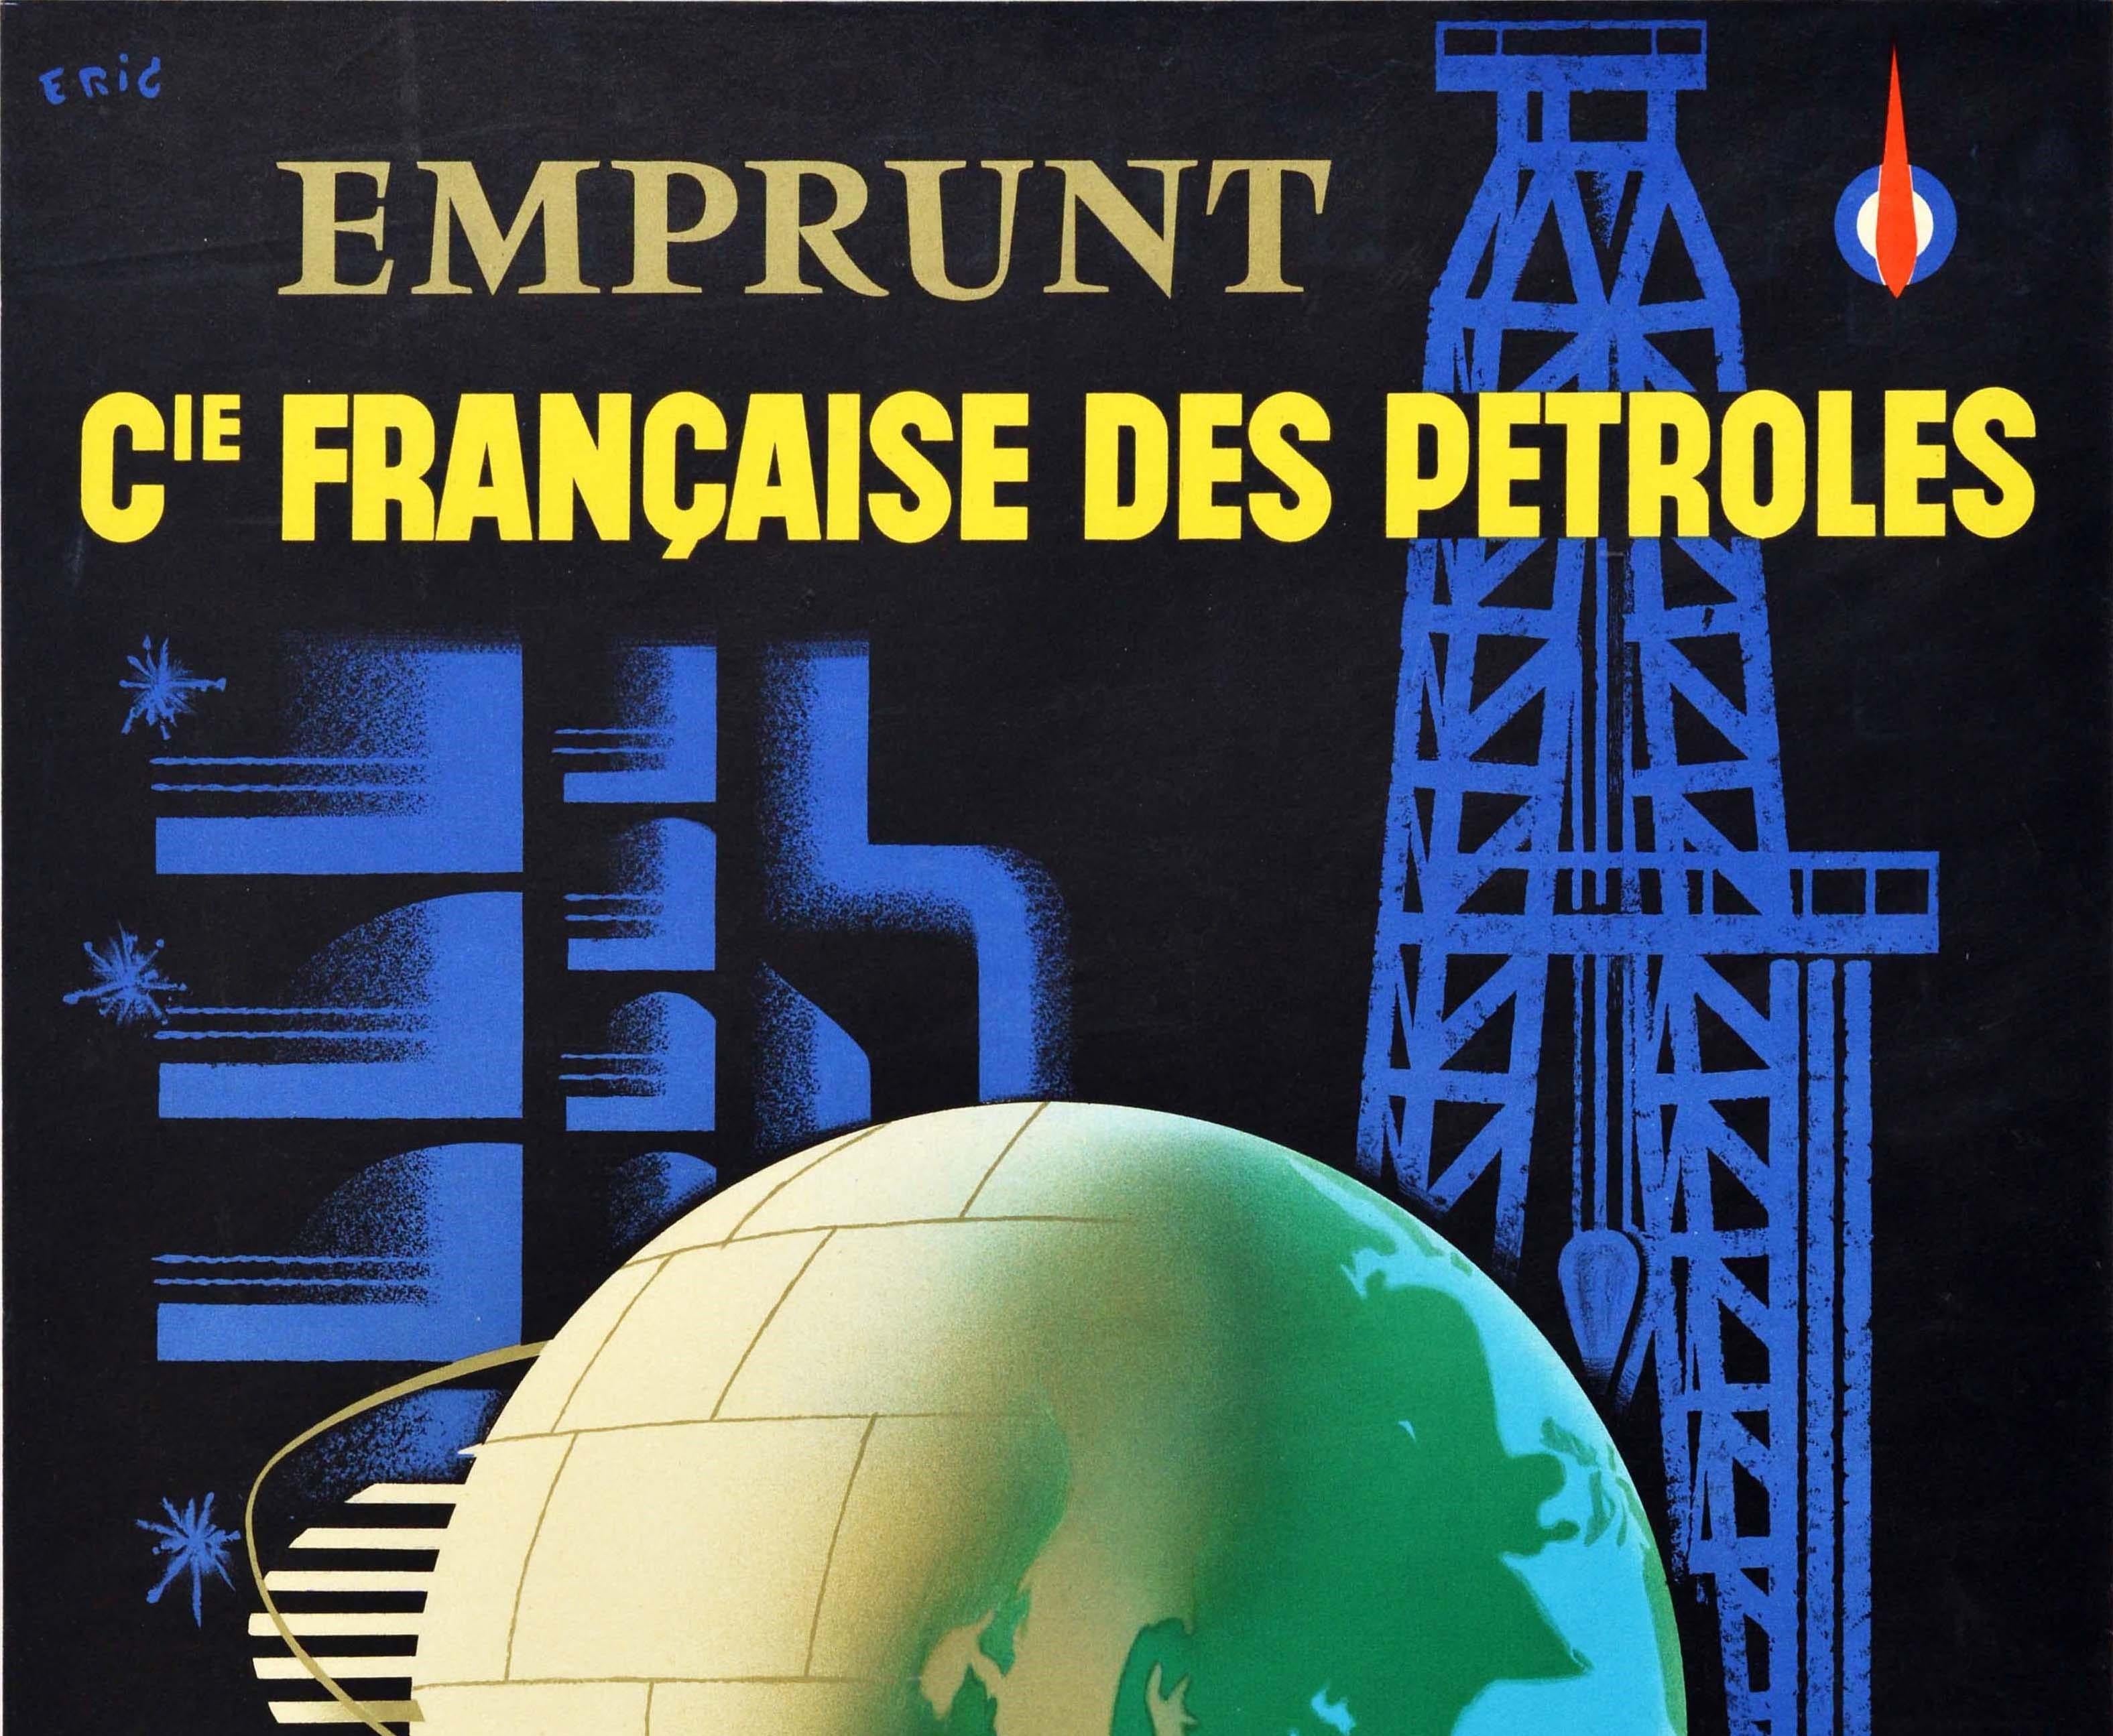 Original vintage advertising poster for Emprunt Cie Francaise des Petroles / French Loan Company of Petroleum featuring a great graphic design by Raoul Eric Castel (1915-1997) showing a globe with half a map and the other half as bricks with a metal